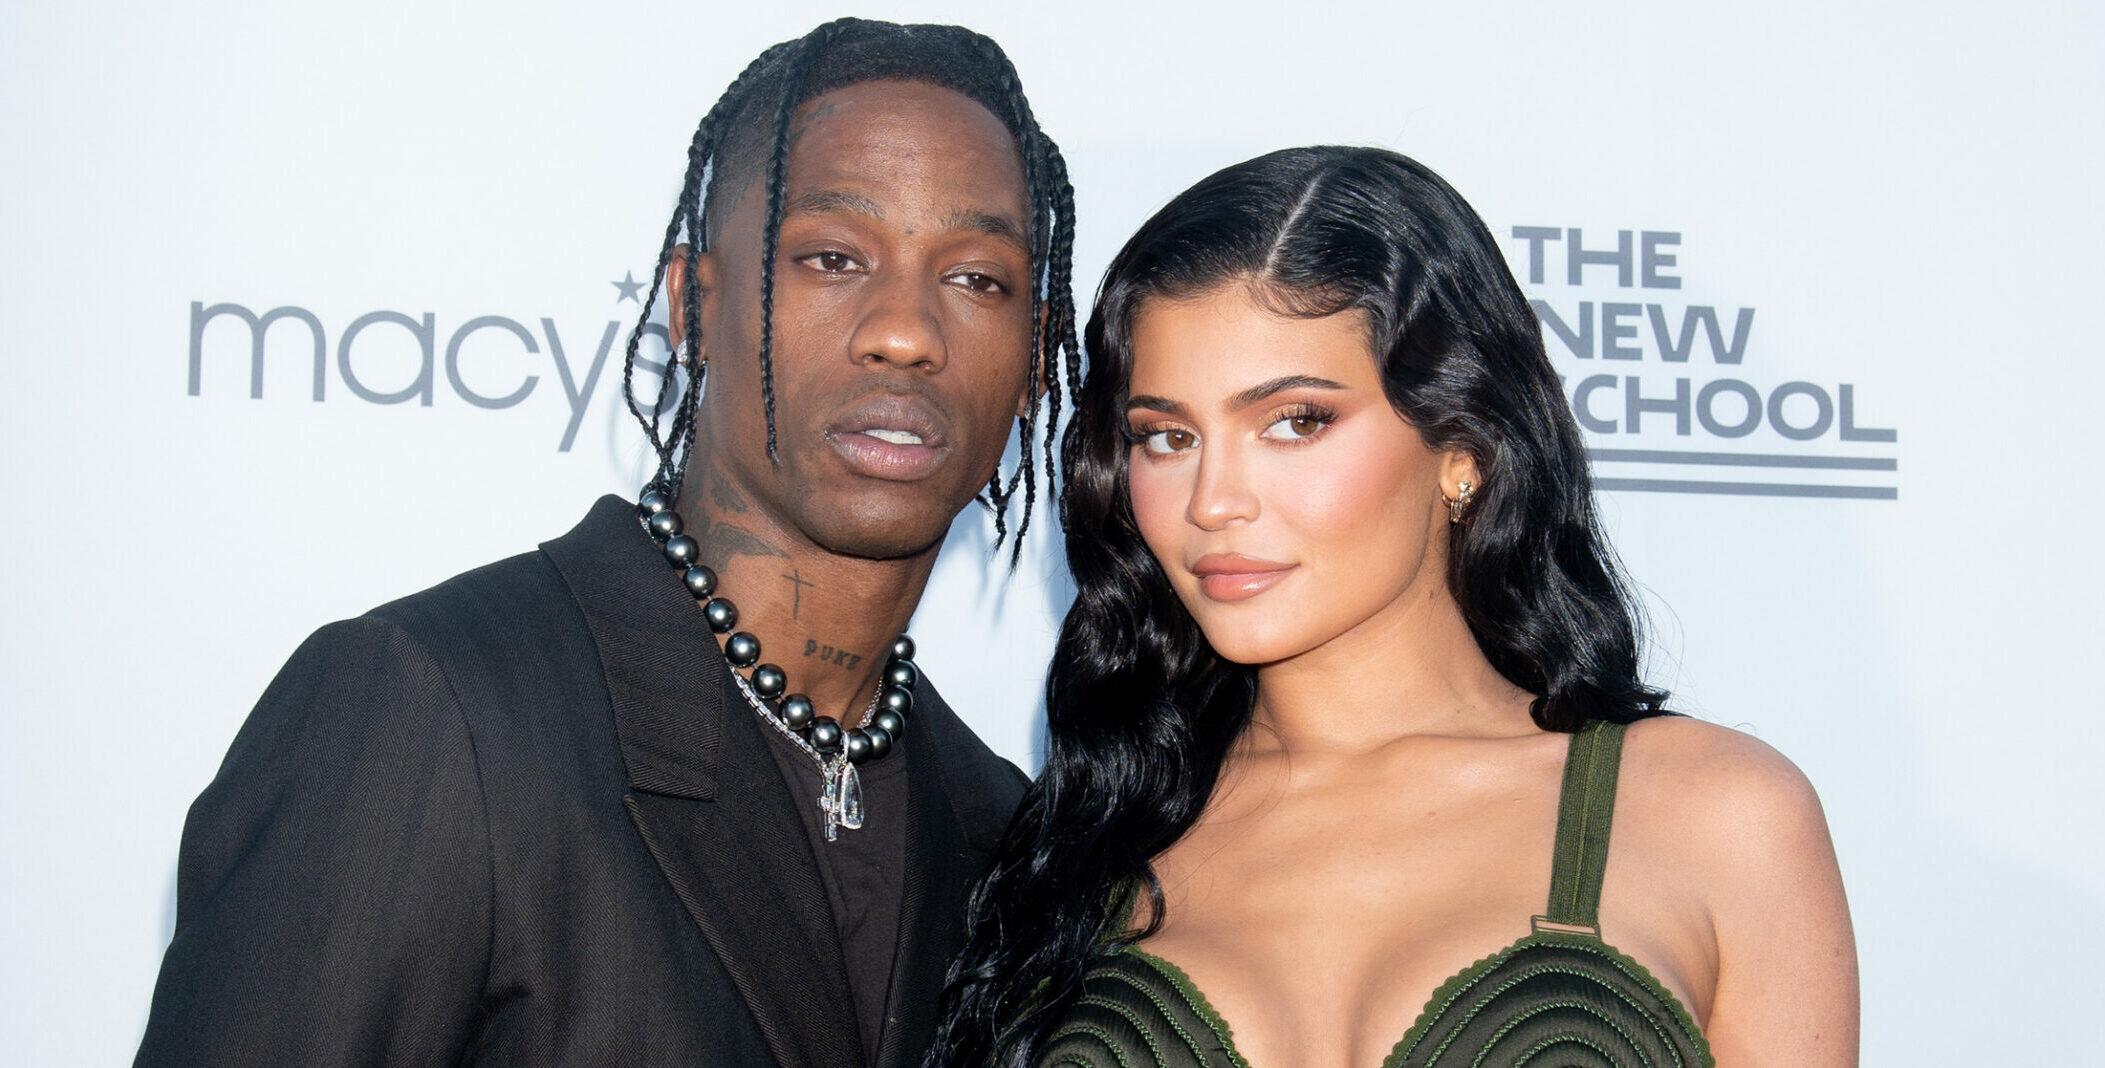 The 72nd Annual Parsons Benefit. 15 Jun 2021 Pictured: Travis Scott, Kylie Jenner.